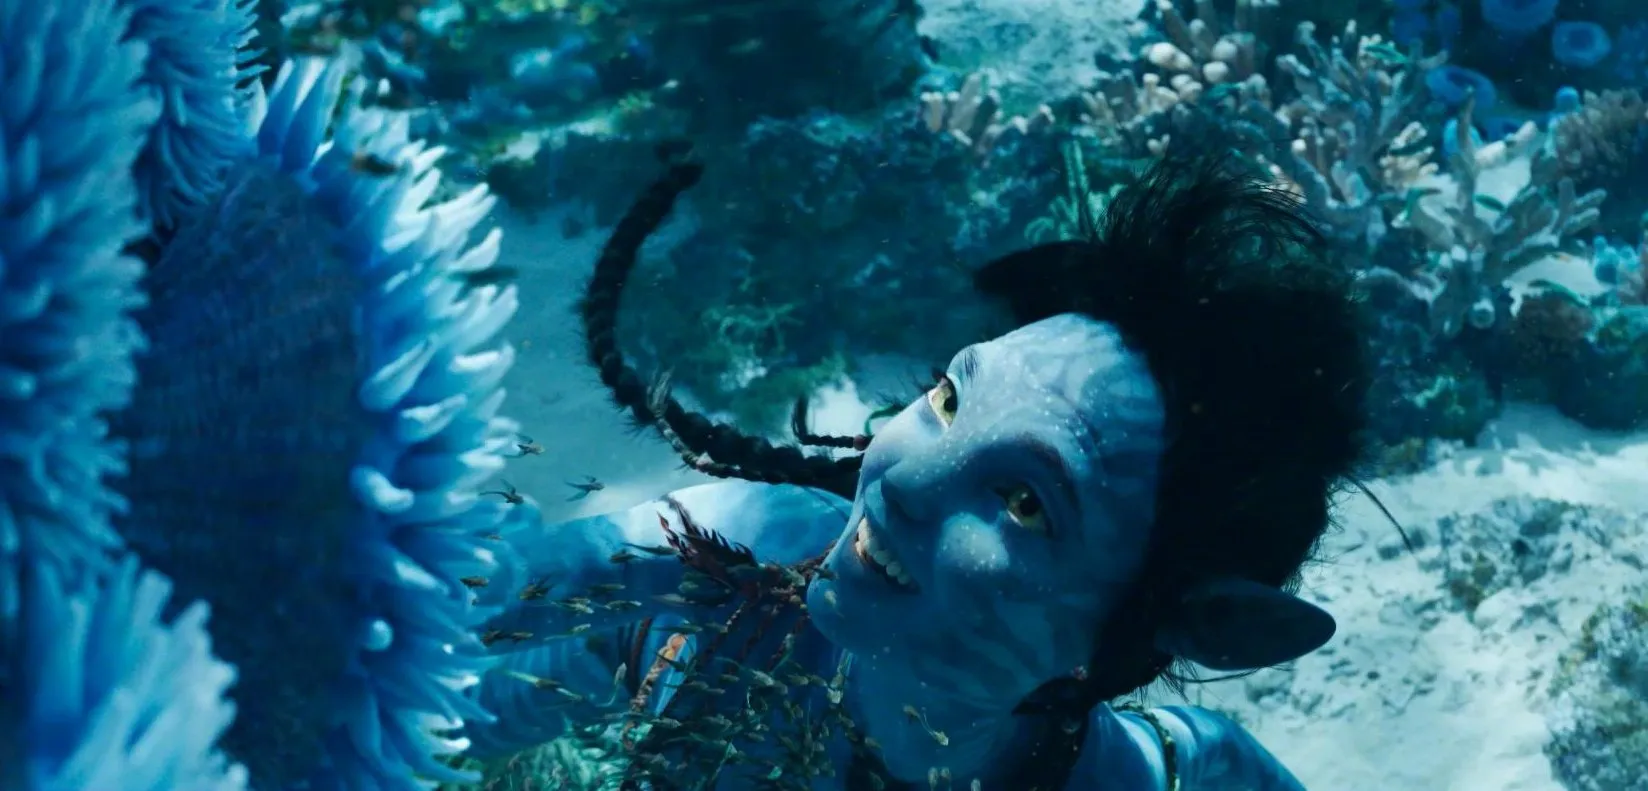 "Avatar: The Way of Water" Releases New Trailer and Poster, Is She the Heroine? The girl who swims underwater. ​​​​